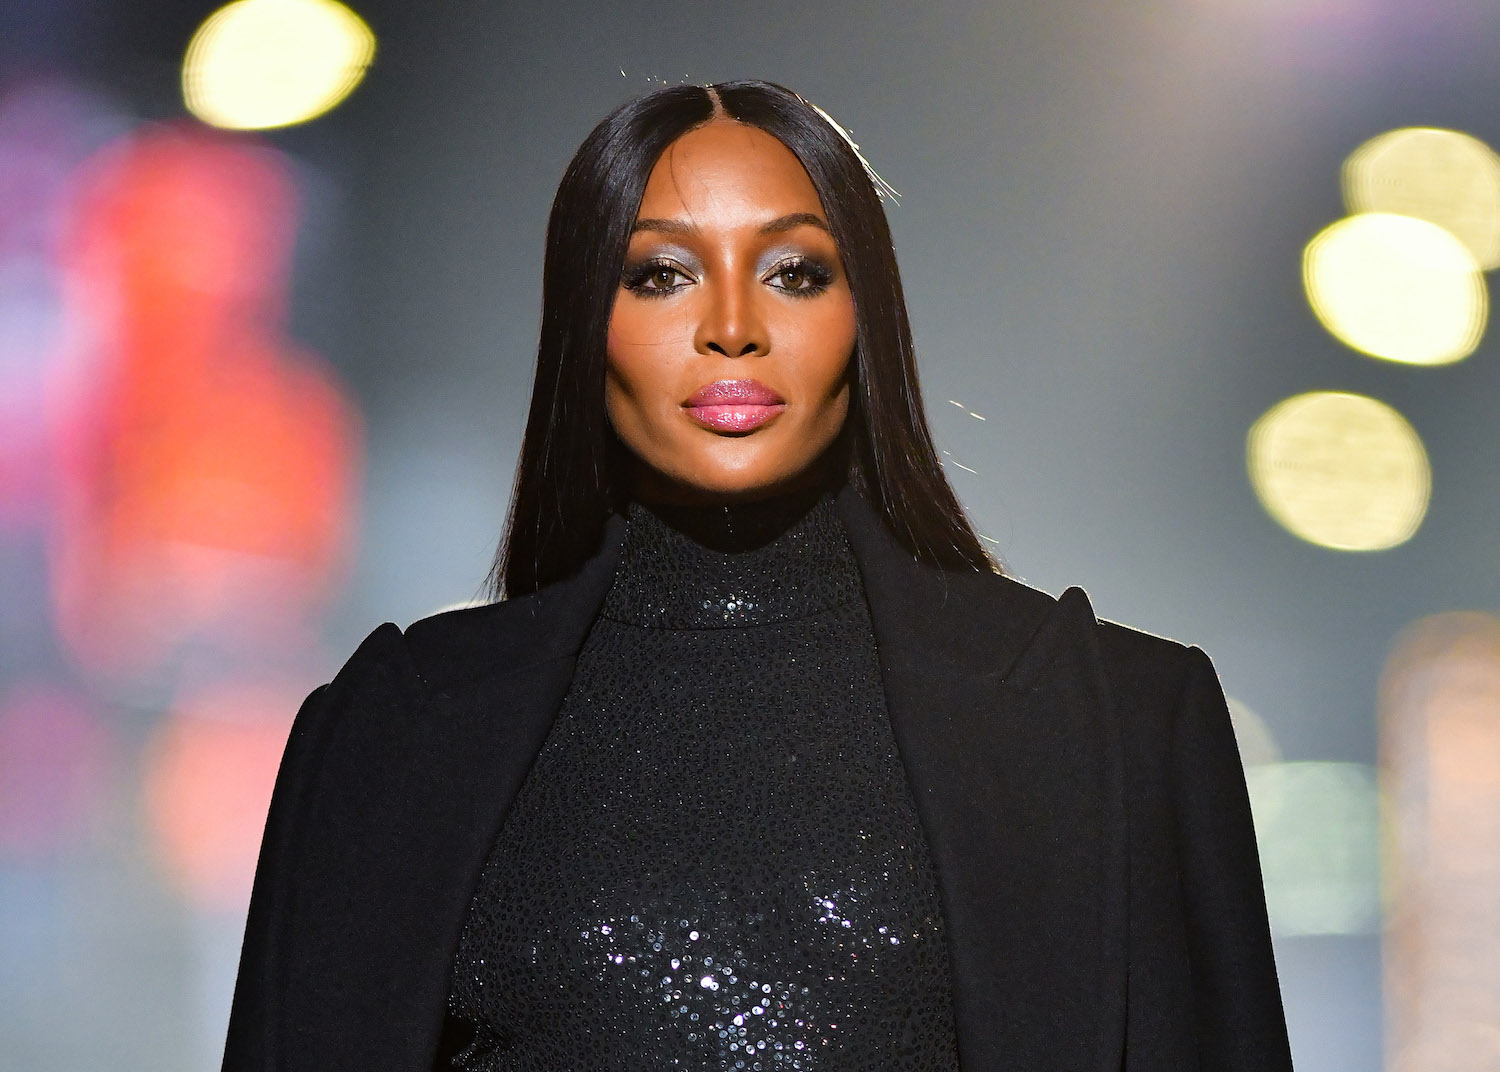 NEW YORK, NEW YORK - APRIL 08:  Naomi Campbell walks along 46th Street during the Michael Kors Fashion Show in Times Square on April 08, 2021 in New York City. (Photo by James Devaney/GC Images)